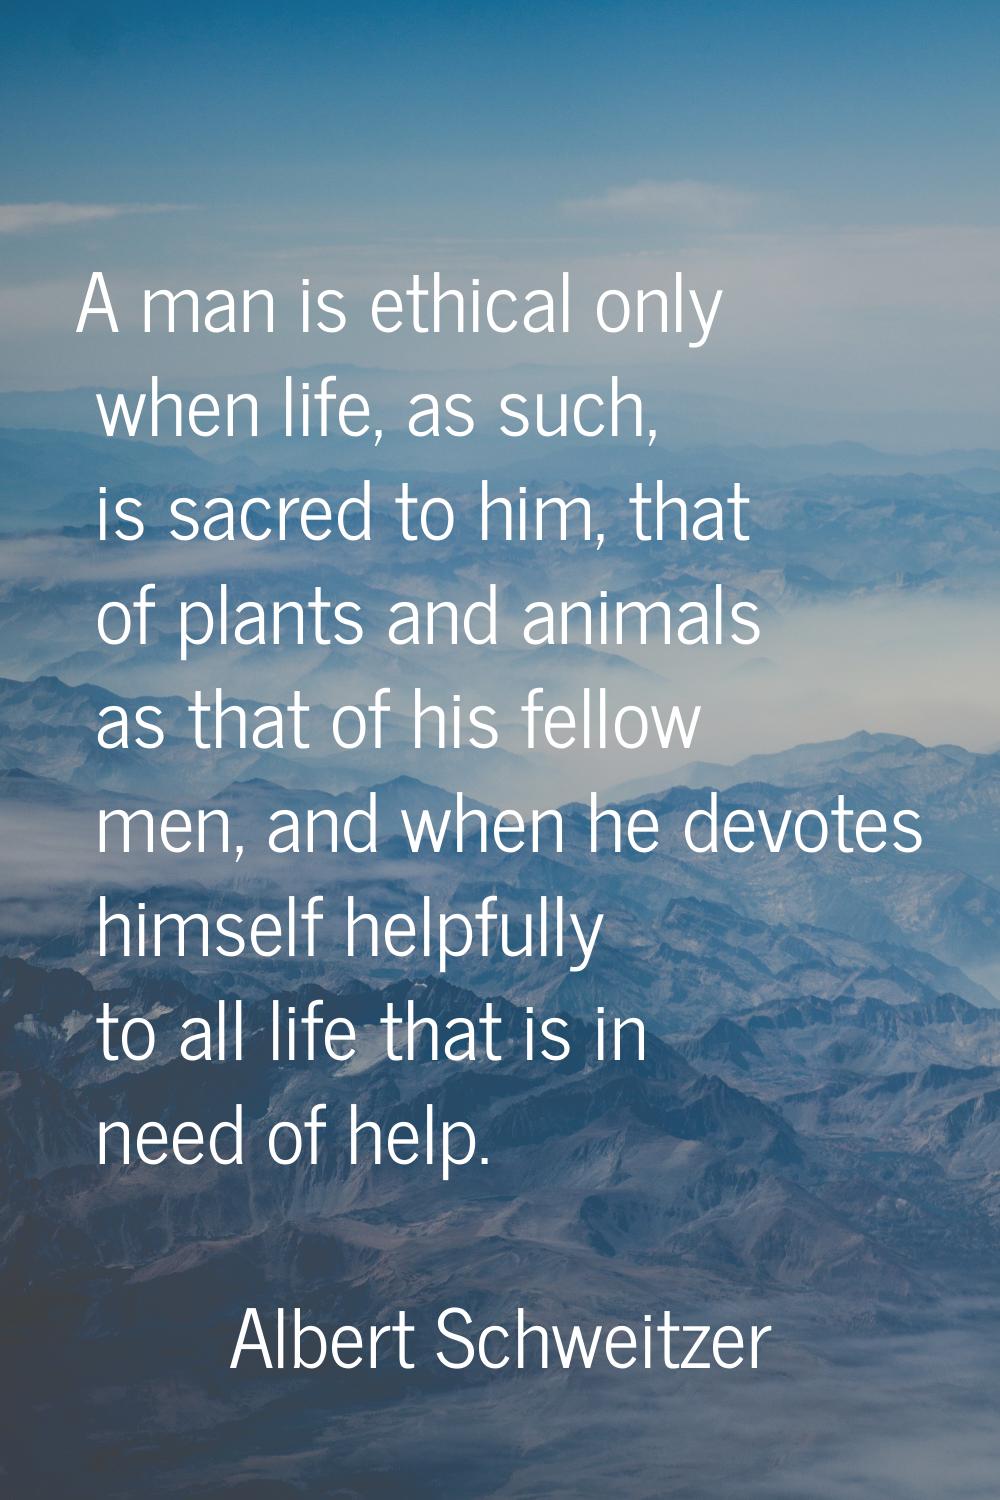 A man is ethical only when life, as such, is sacred to him, that of plants and animals as that of h